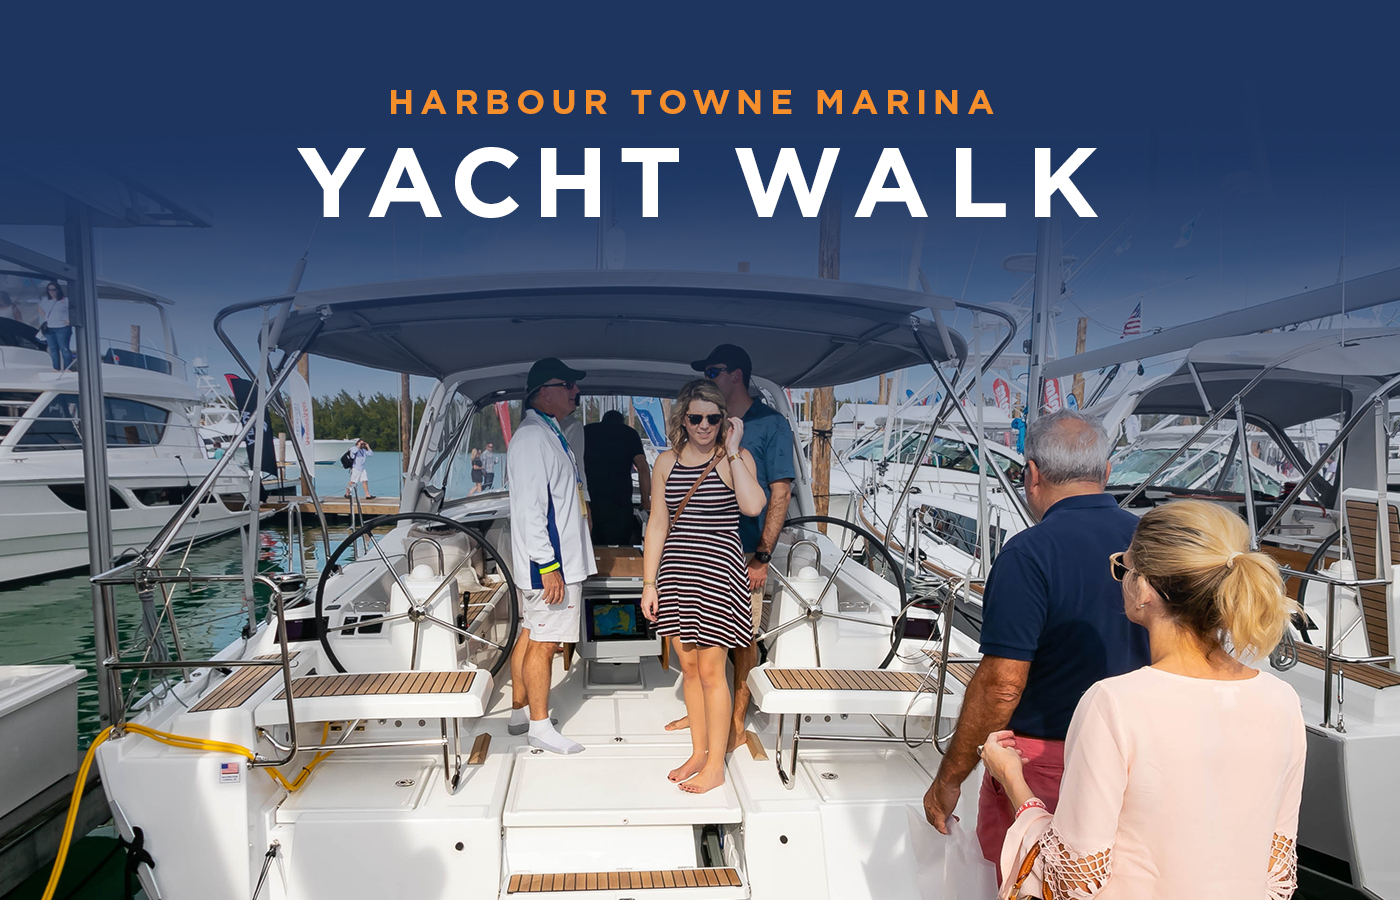 Yacht Walk: Harbour Towne Marina [March 2019]